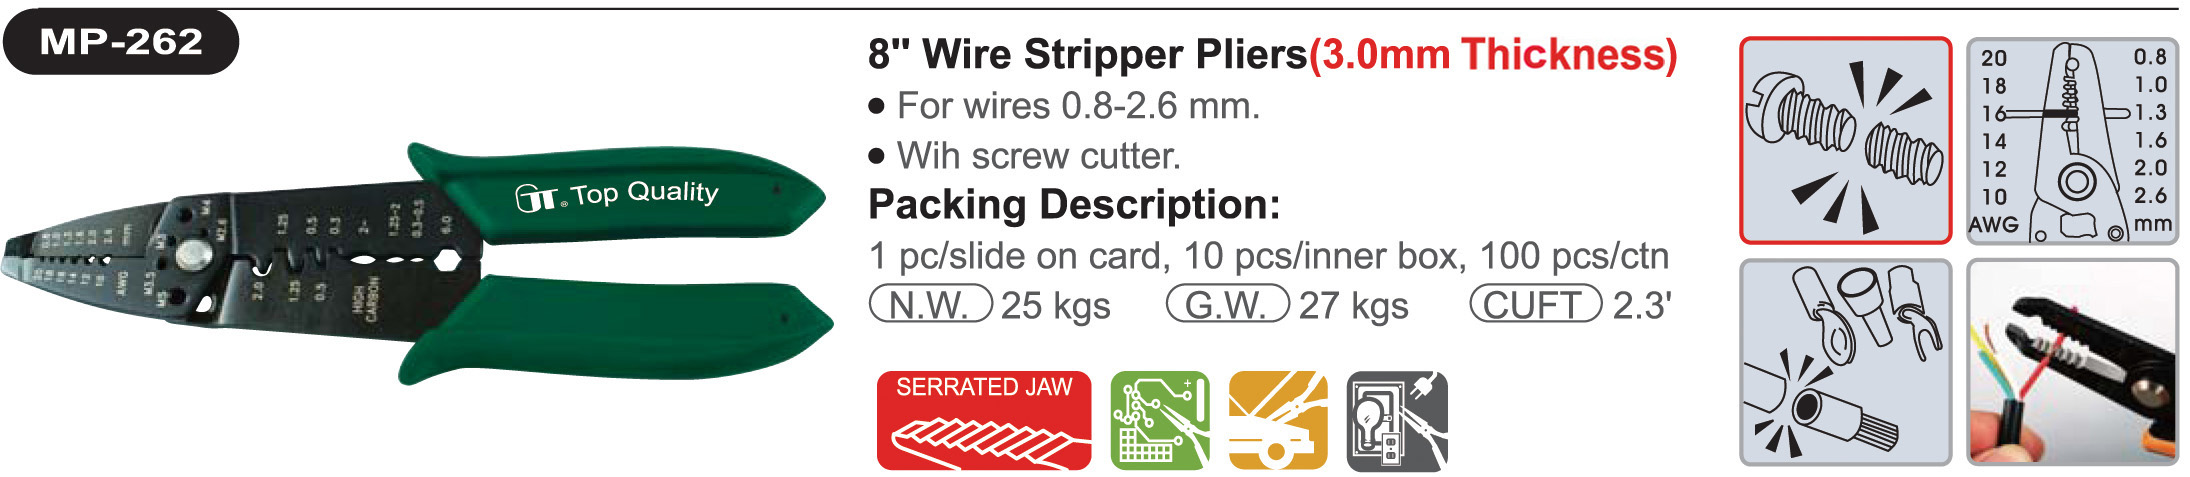 proimages/product/pliers/wire_strippers/MULTI-PURPOSE_WIRE_STRIPPERS/MP-262/MP-262.jpg